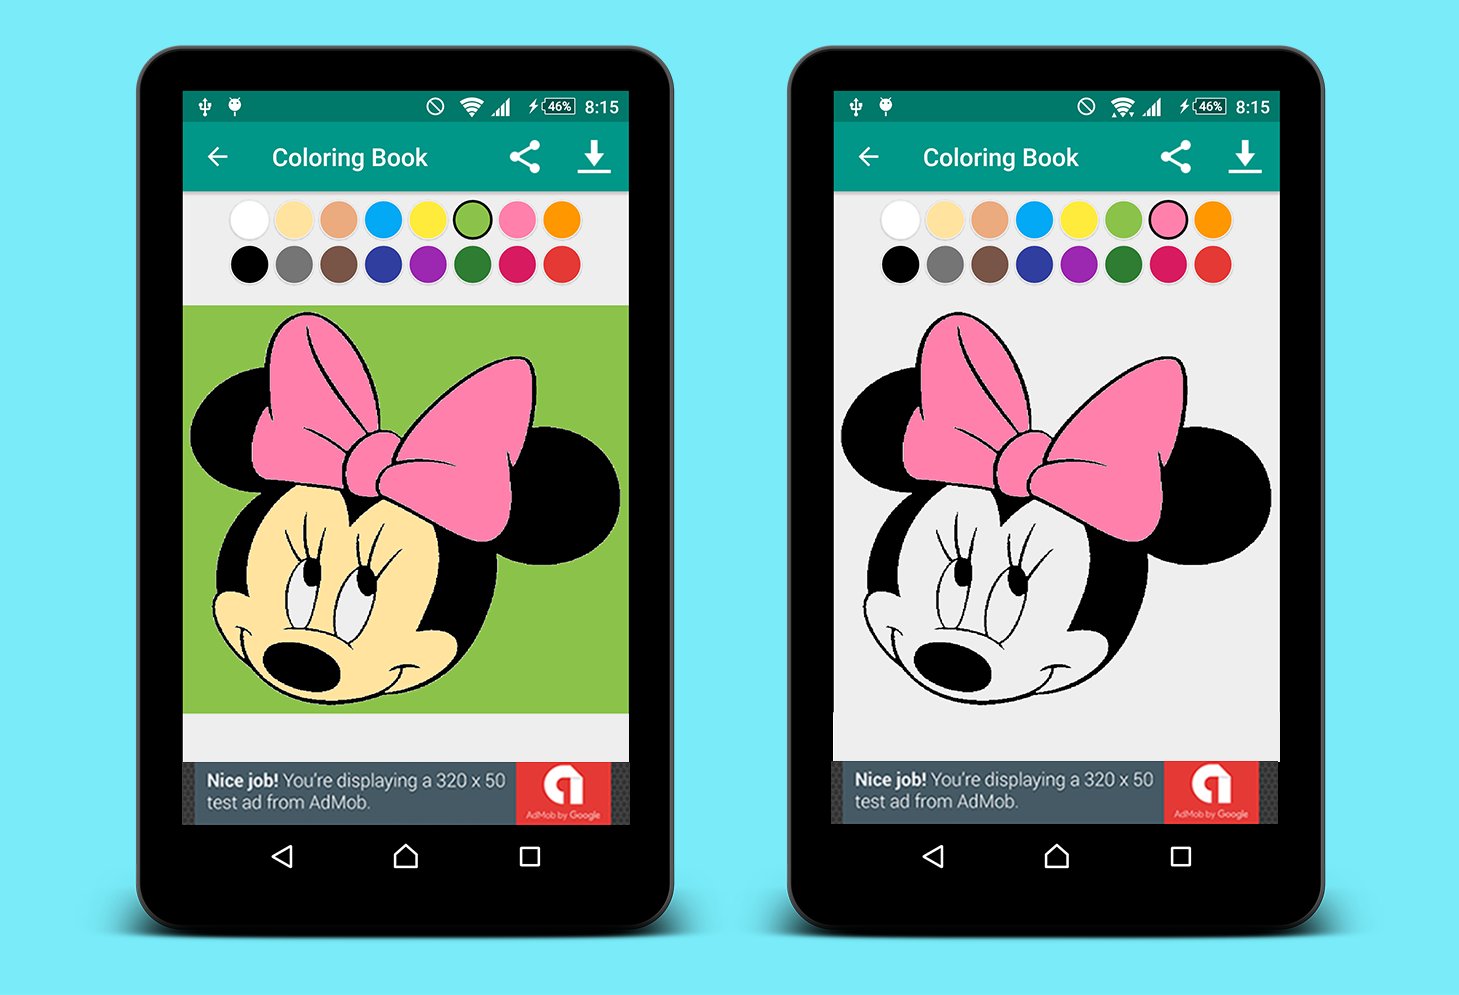 Download Kids Coloring Book for Android by leenah_albanna | CodeCanyon